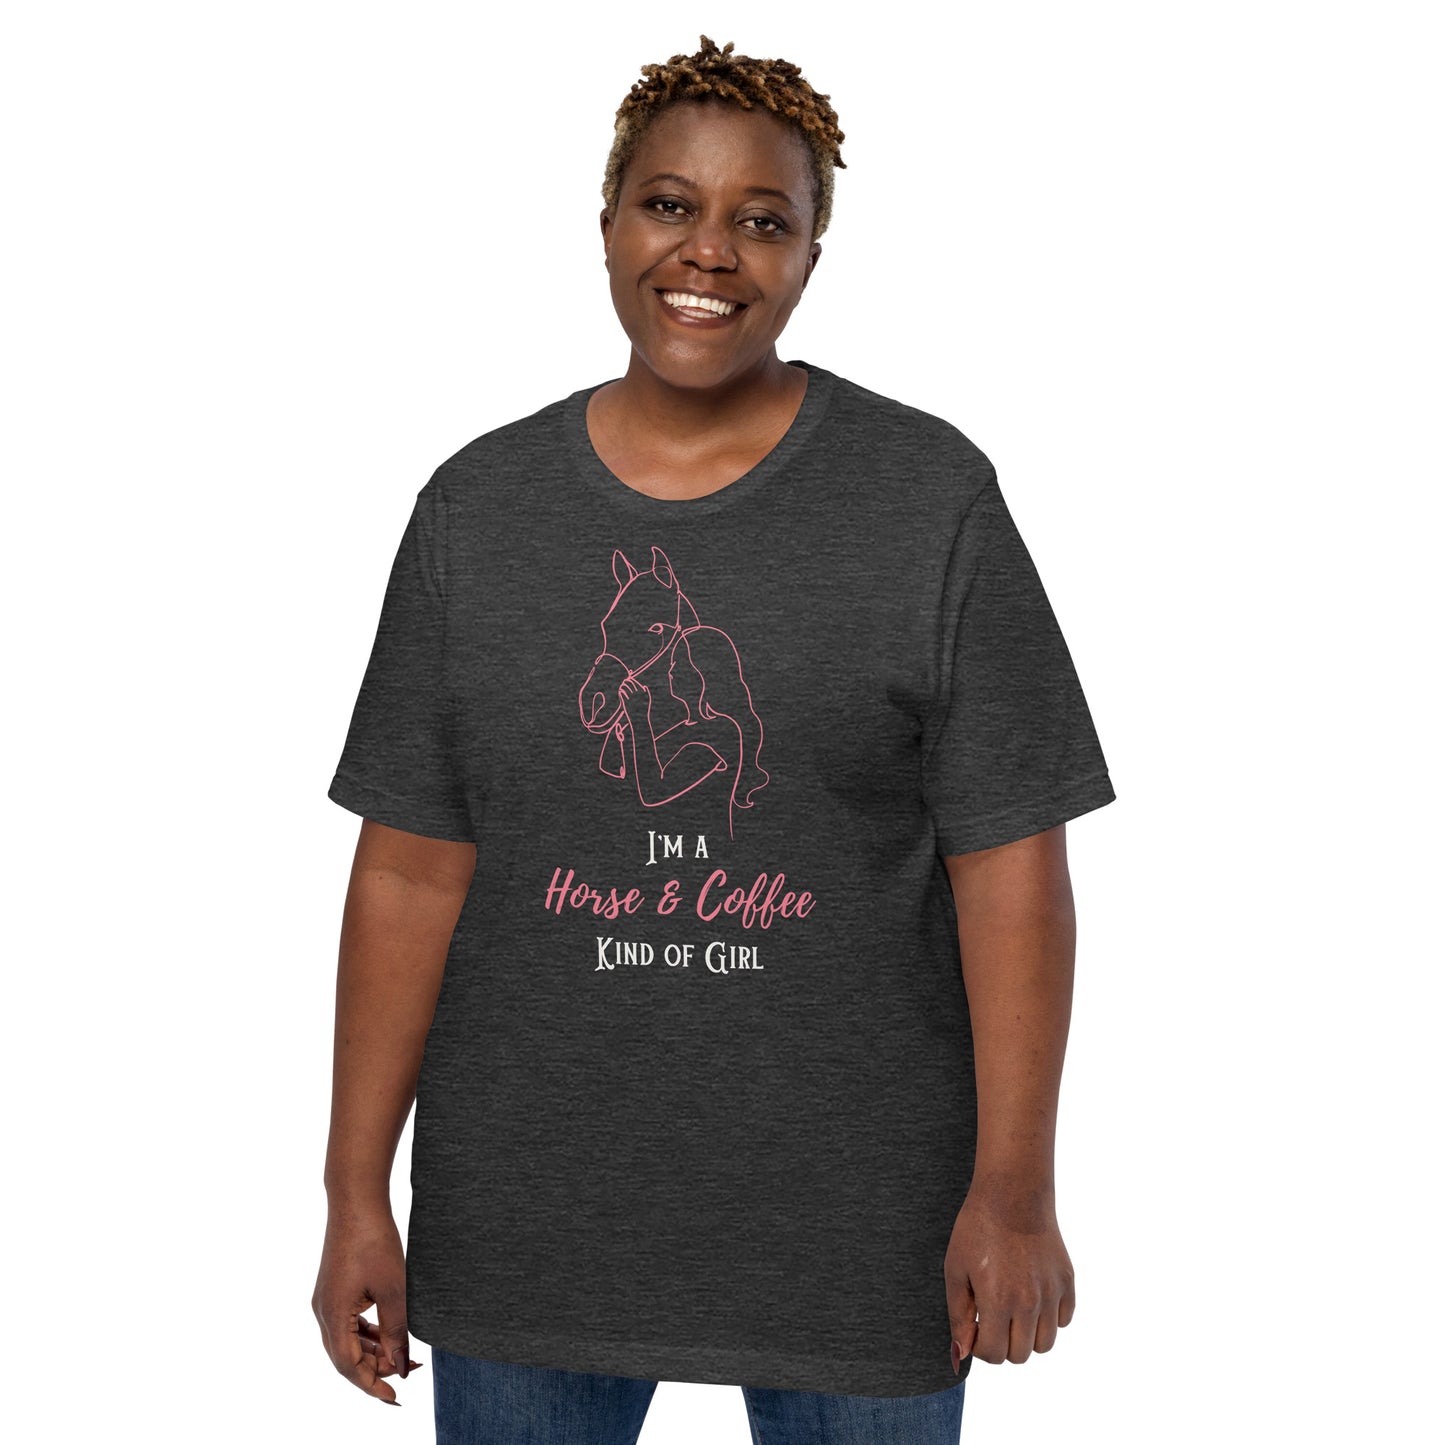 Horse & Coffee Kind of Girl Tee - Adult Crew Neck - Equestrian Apparel - Horse Lover Gift - Pink Line Drawing - Equine Fashion